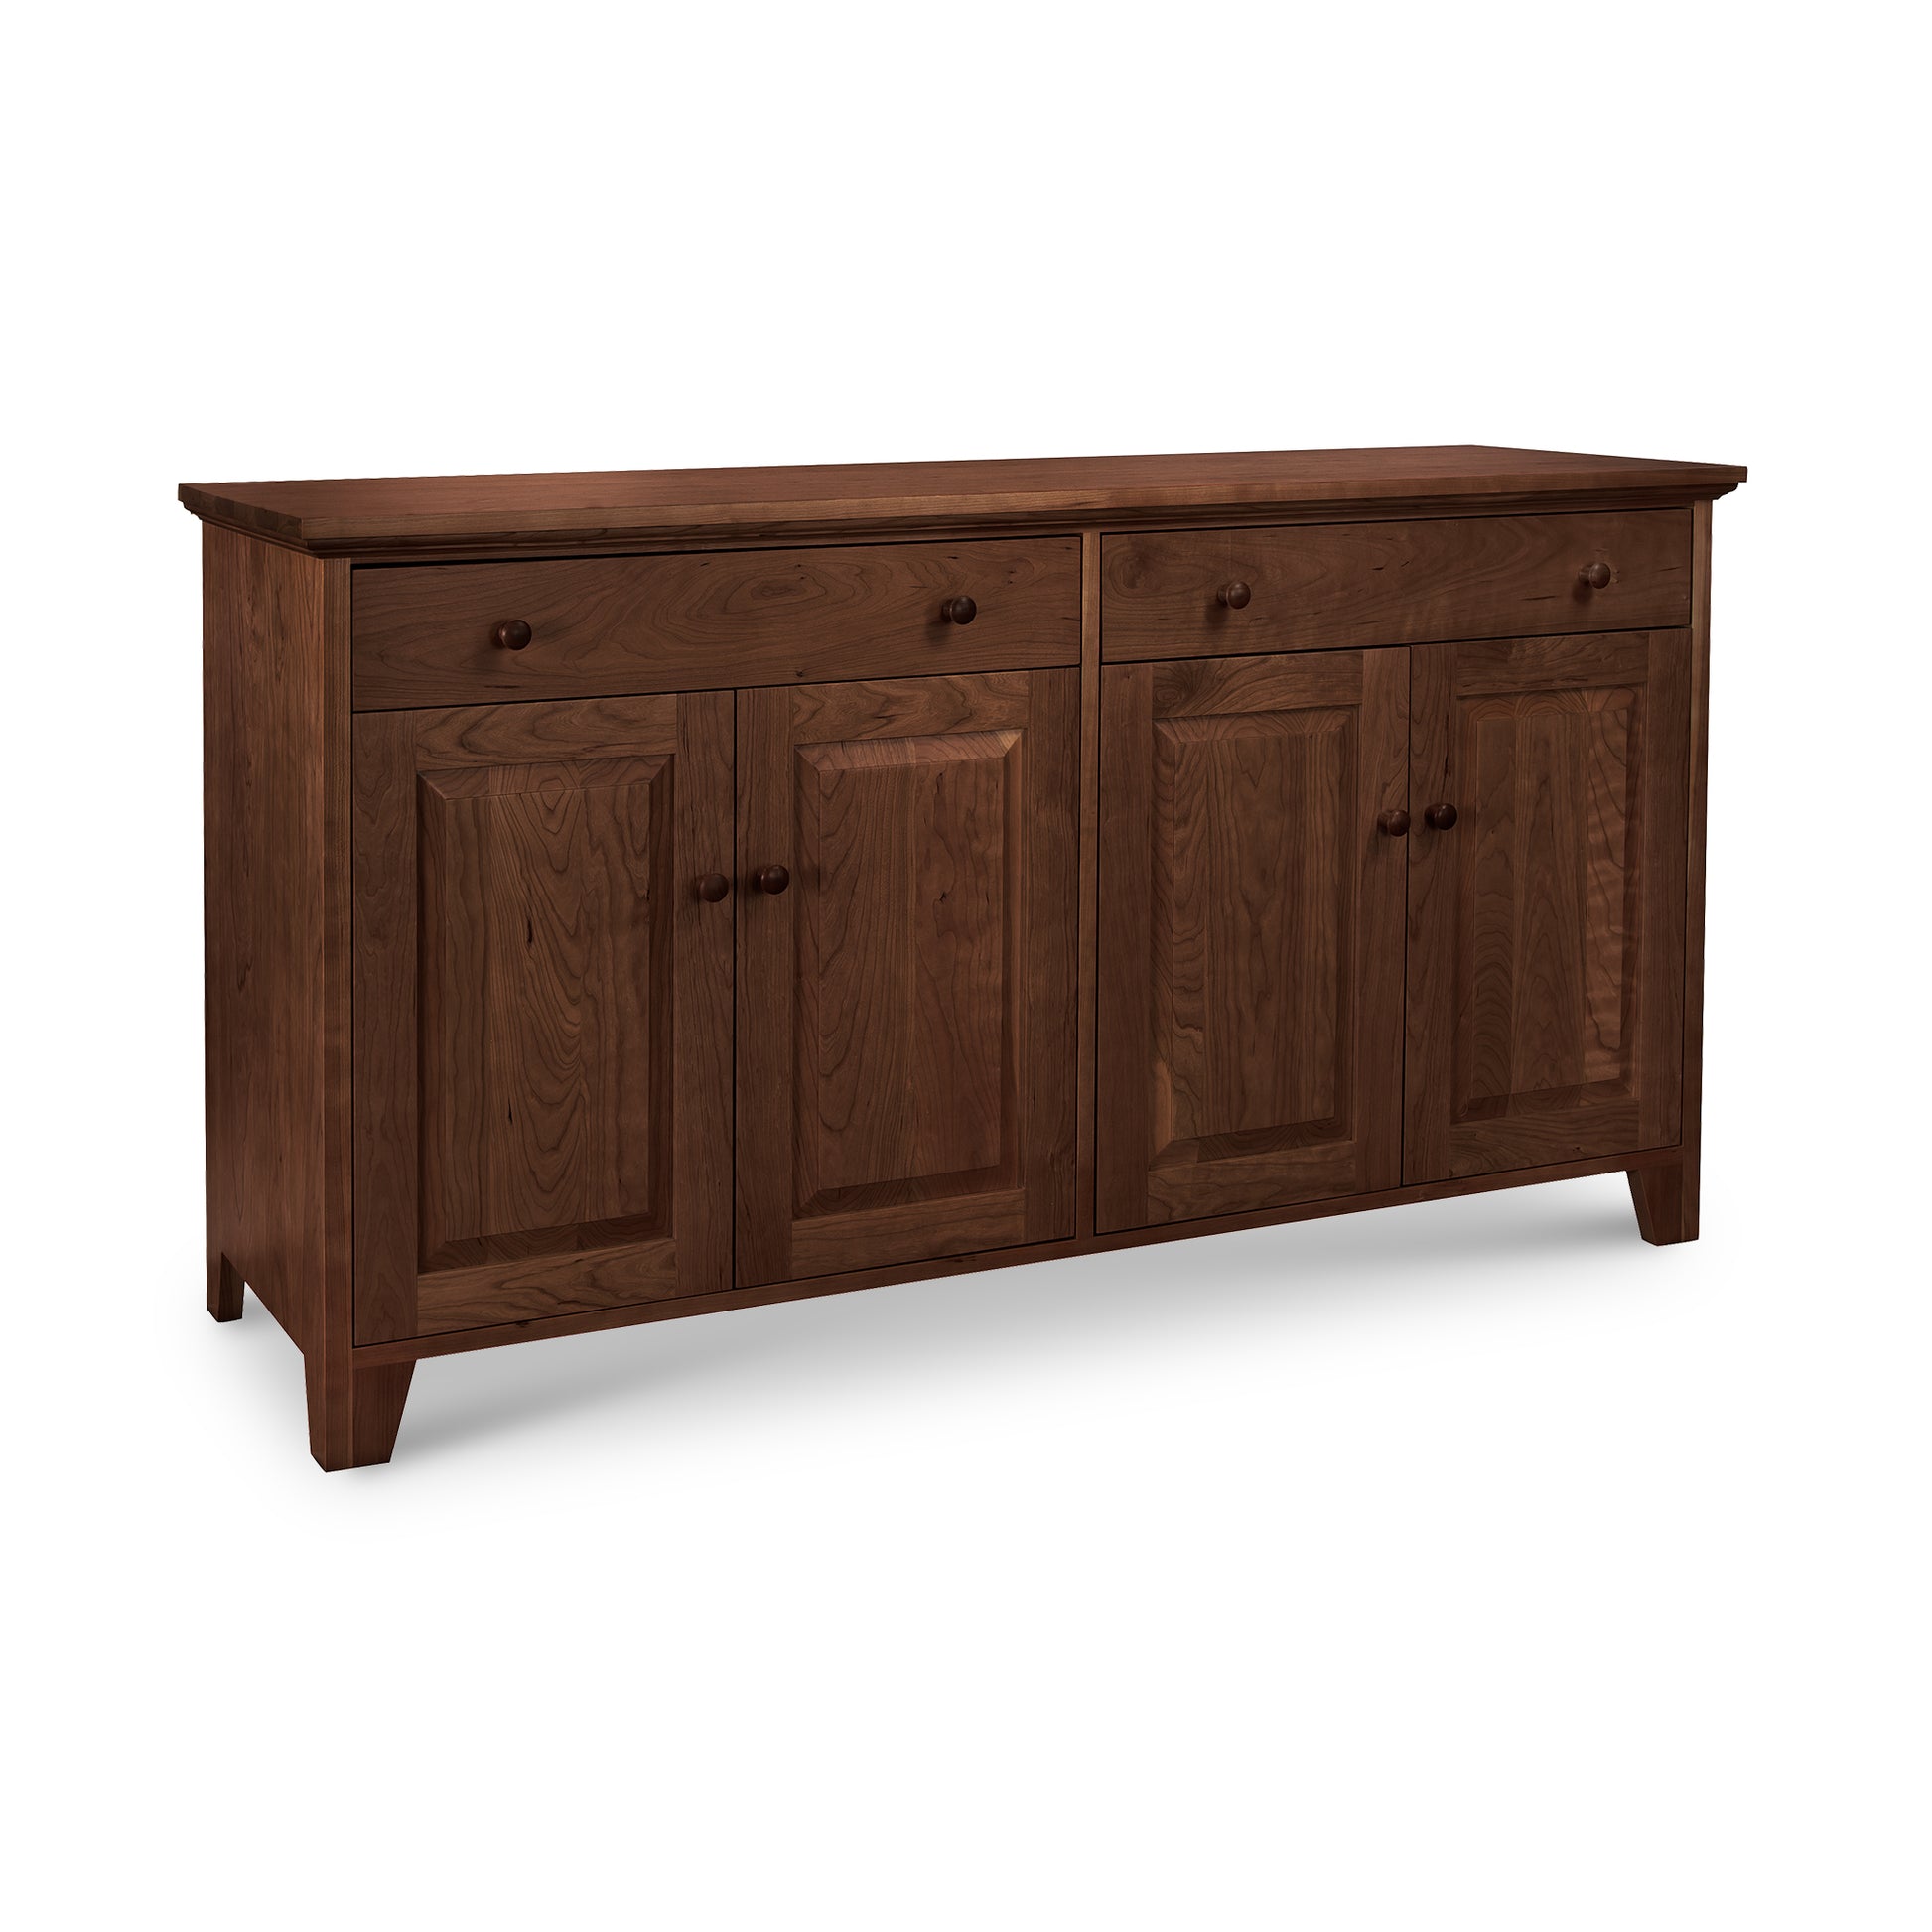 A Classic Country Buffet with hardwood construction, showcasing Lyndon Furniture craftsmanship. This stunning piece features two doors and two drawers, adding both functionality and charm to any living space.